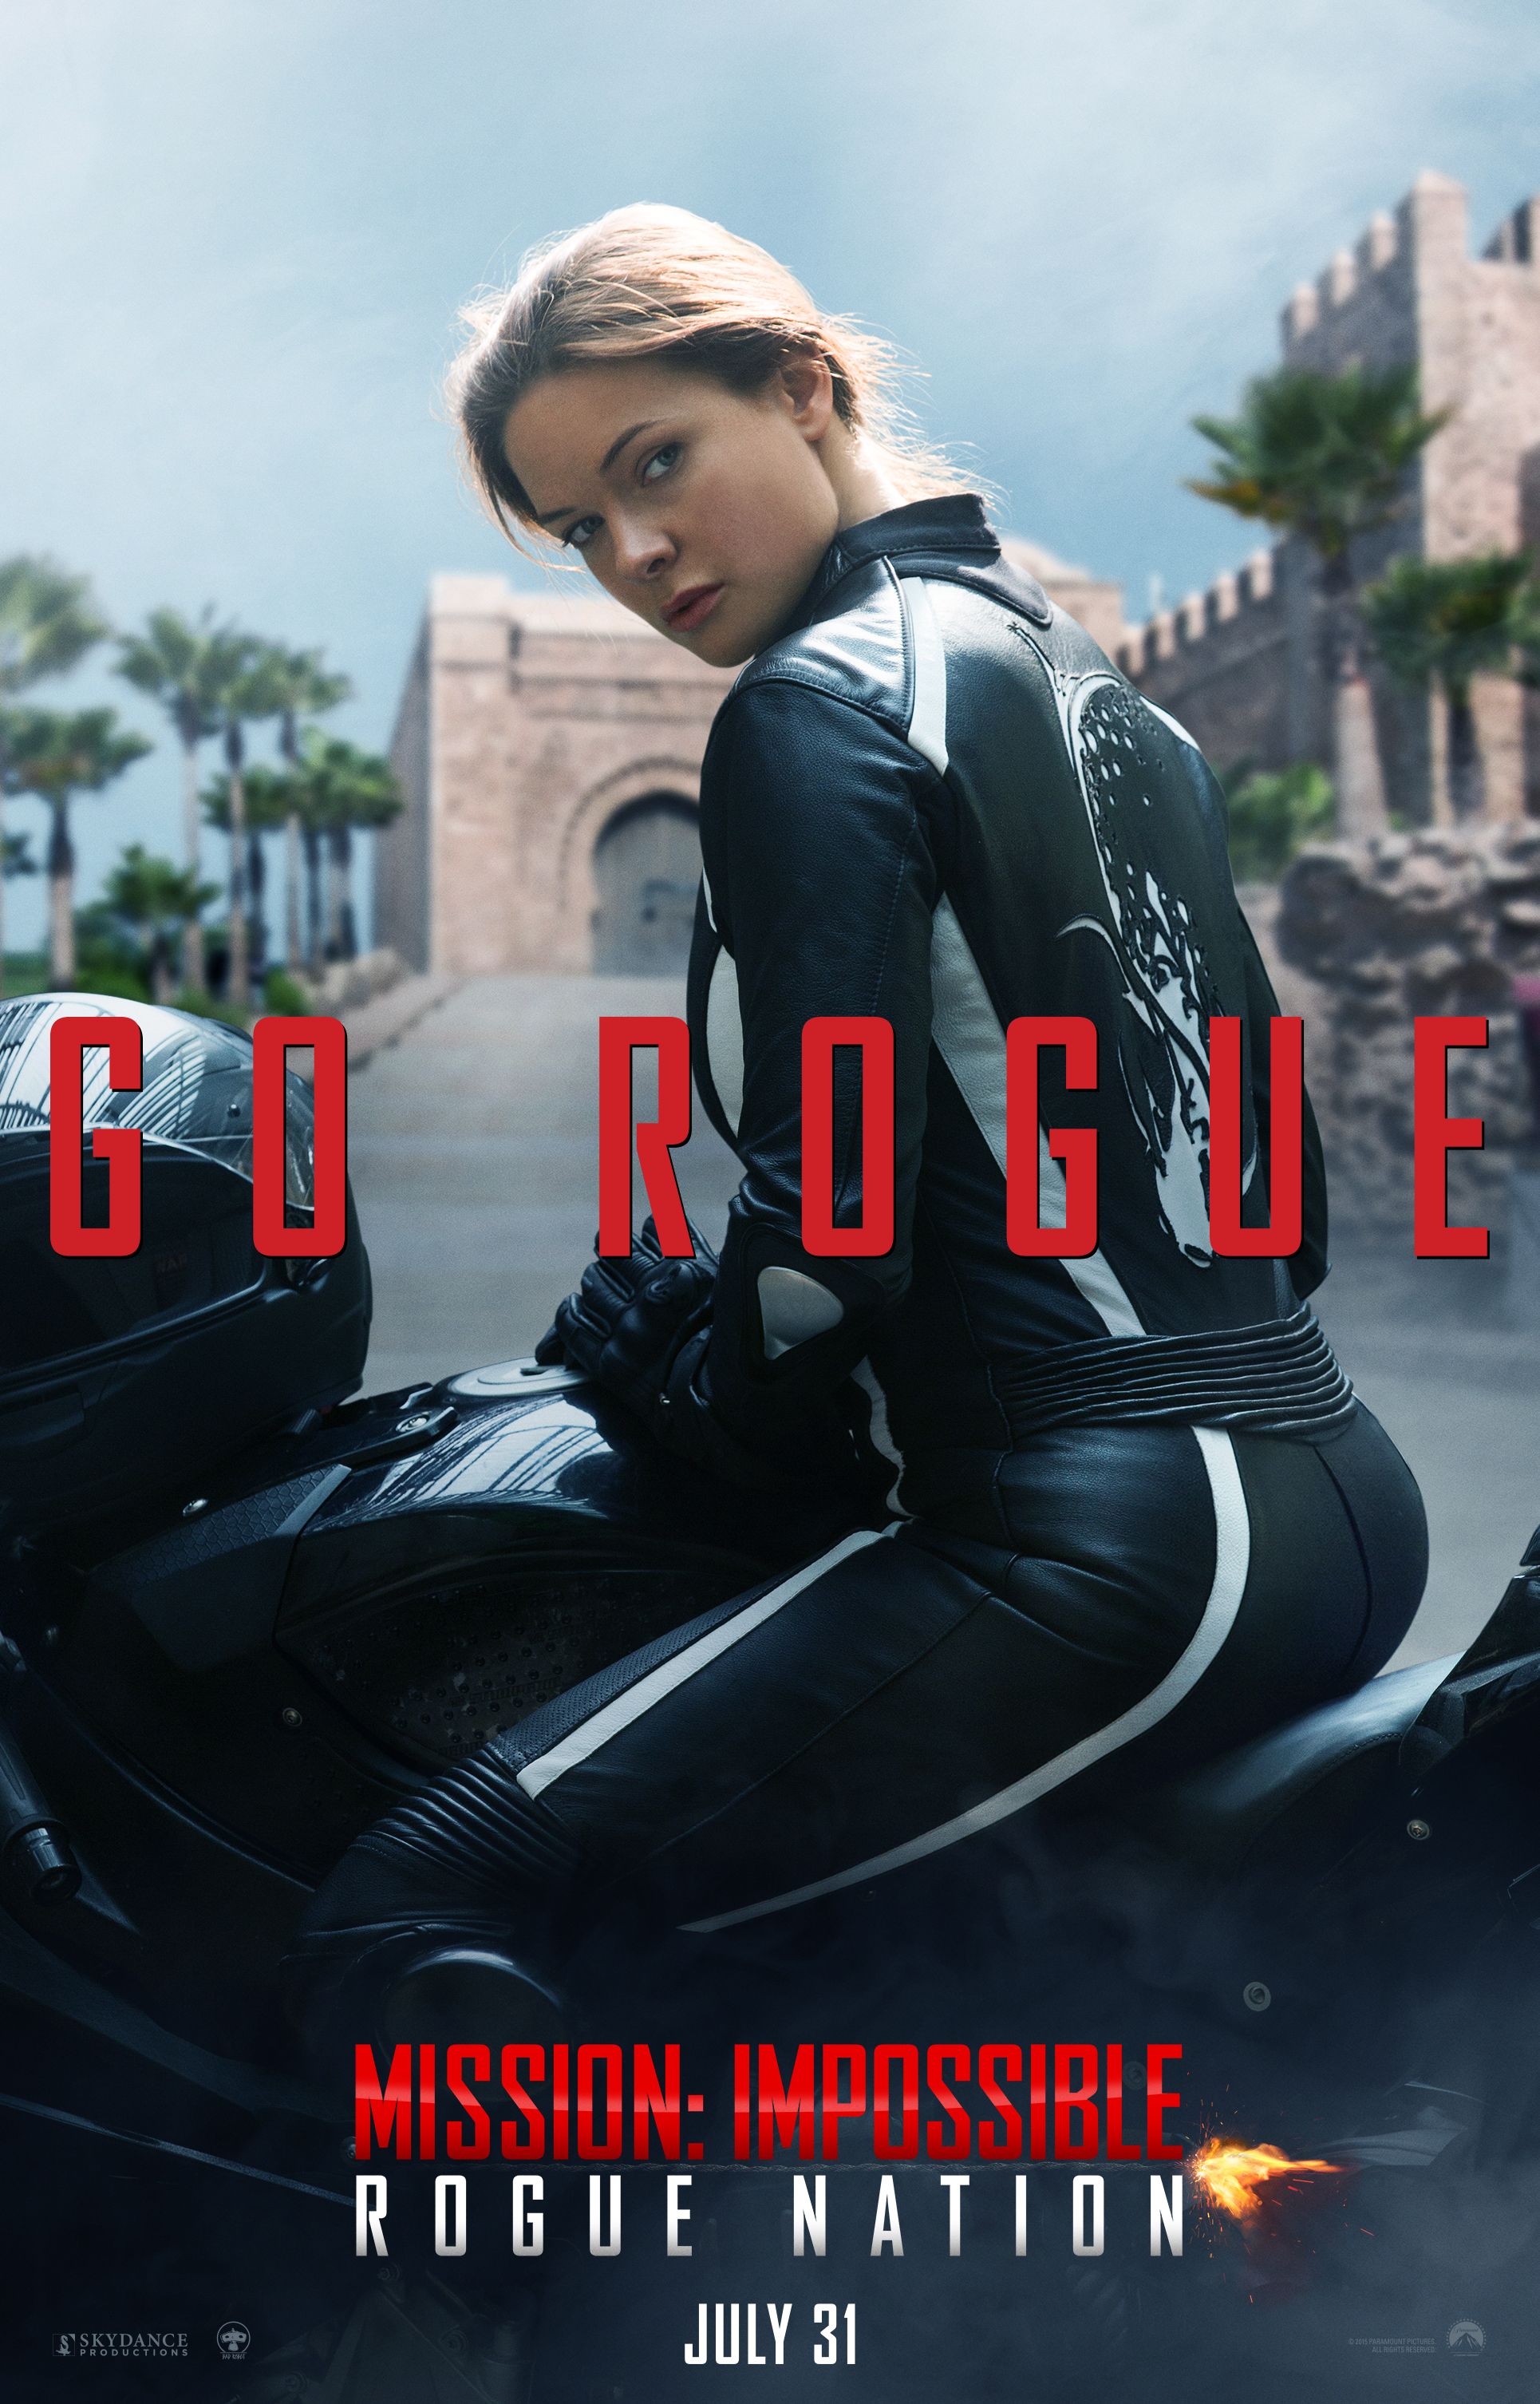 Mission: Impossible Rogue Nation Rebecca Ferguson Poster